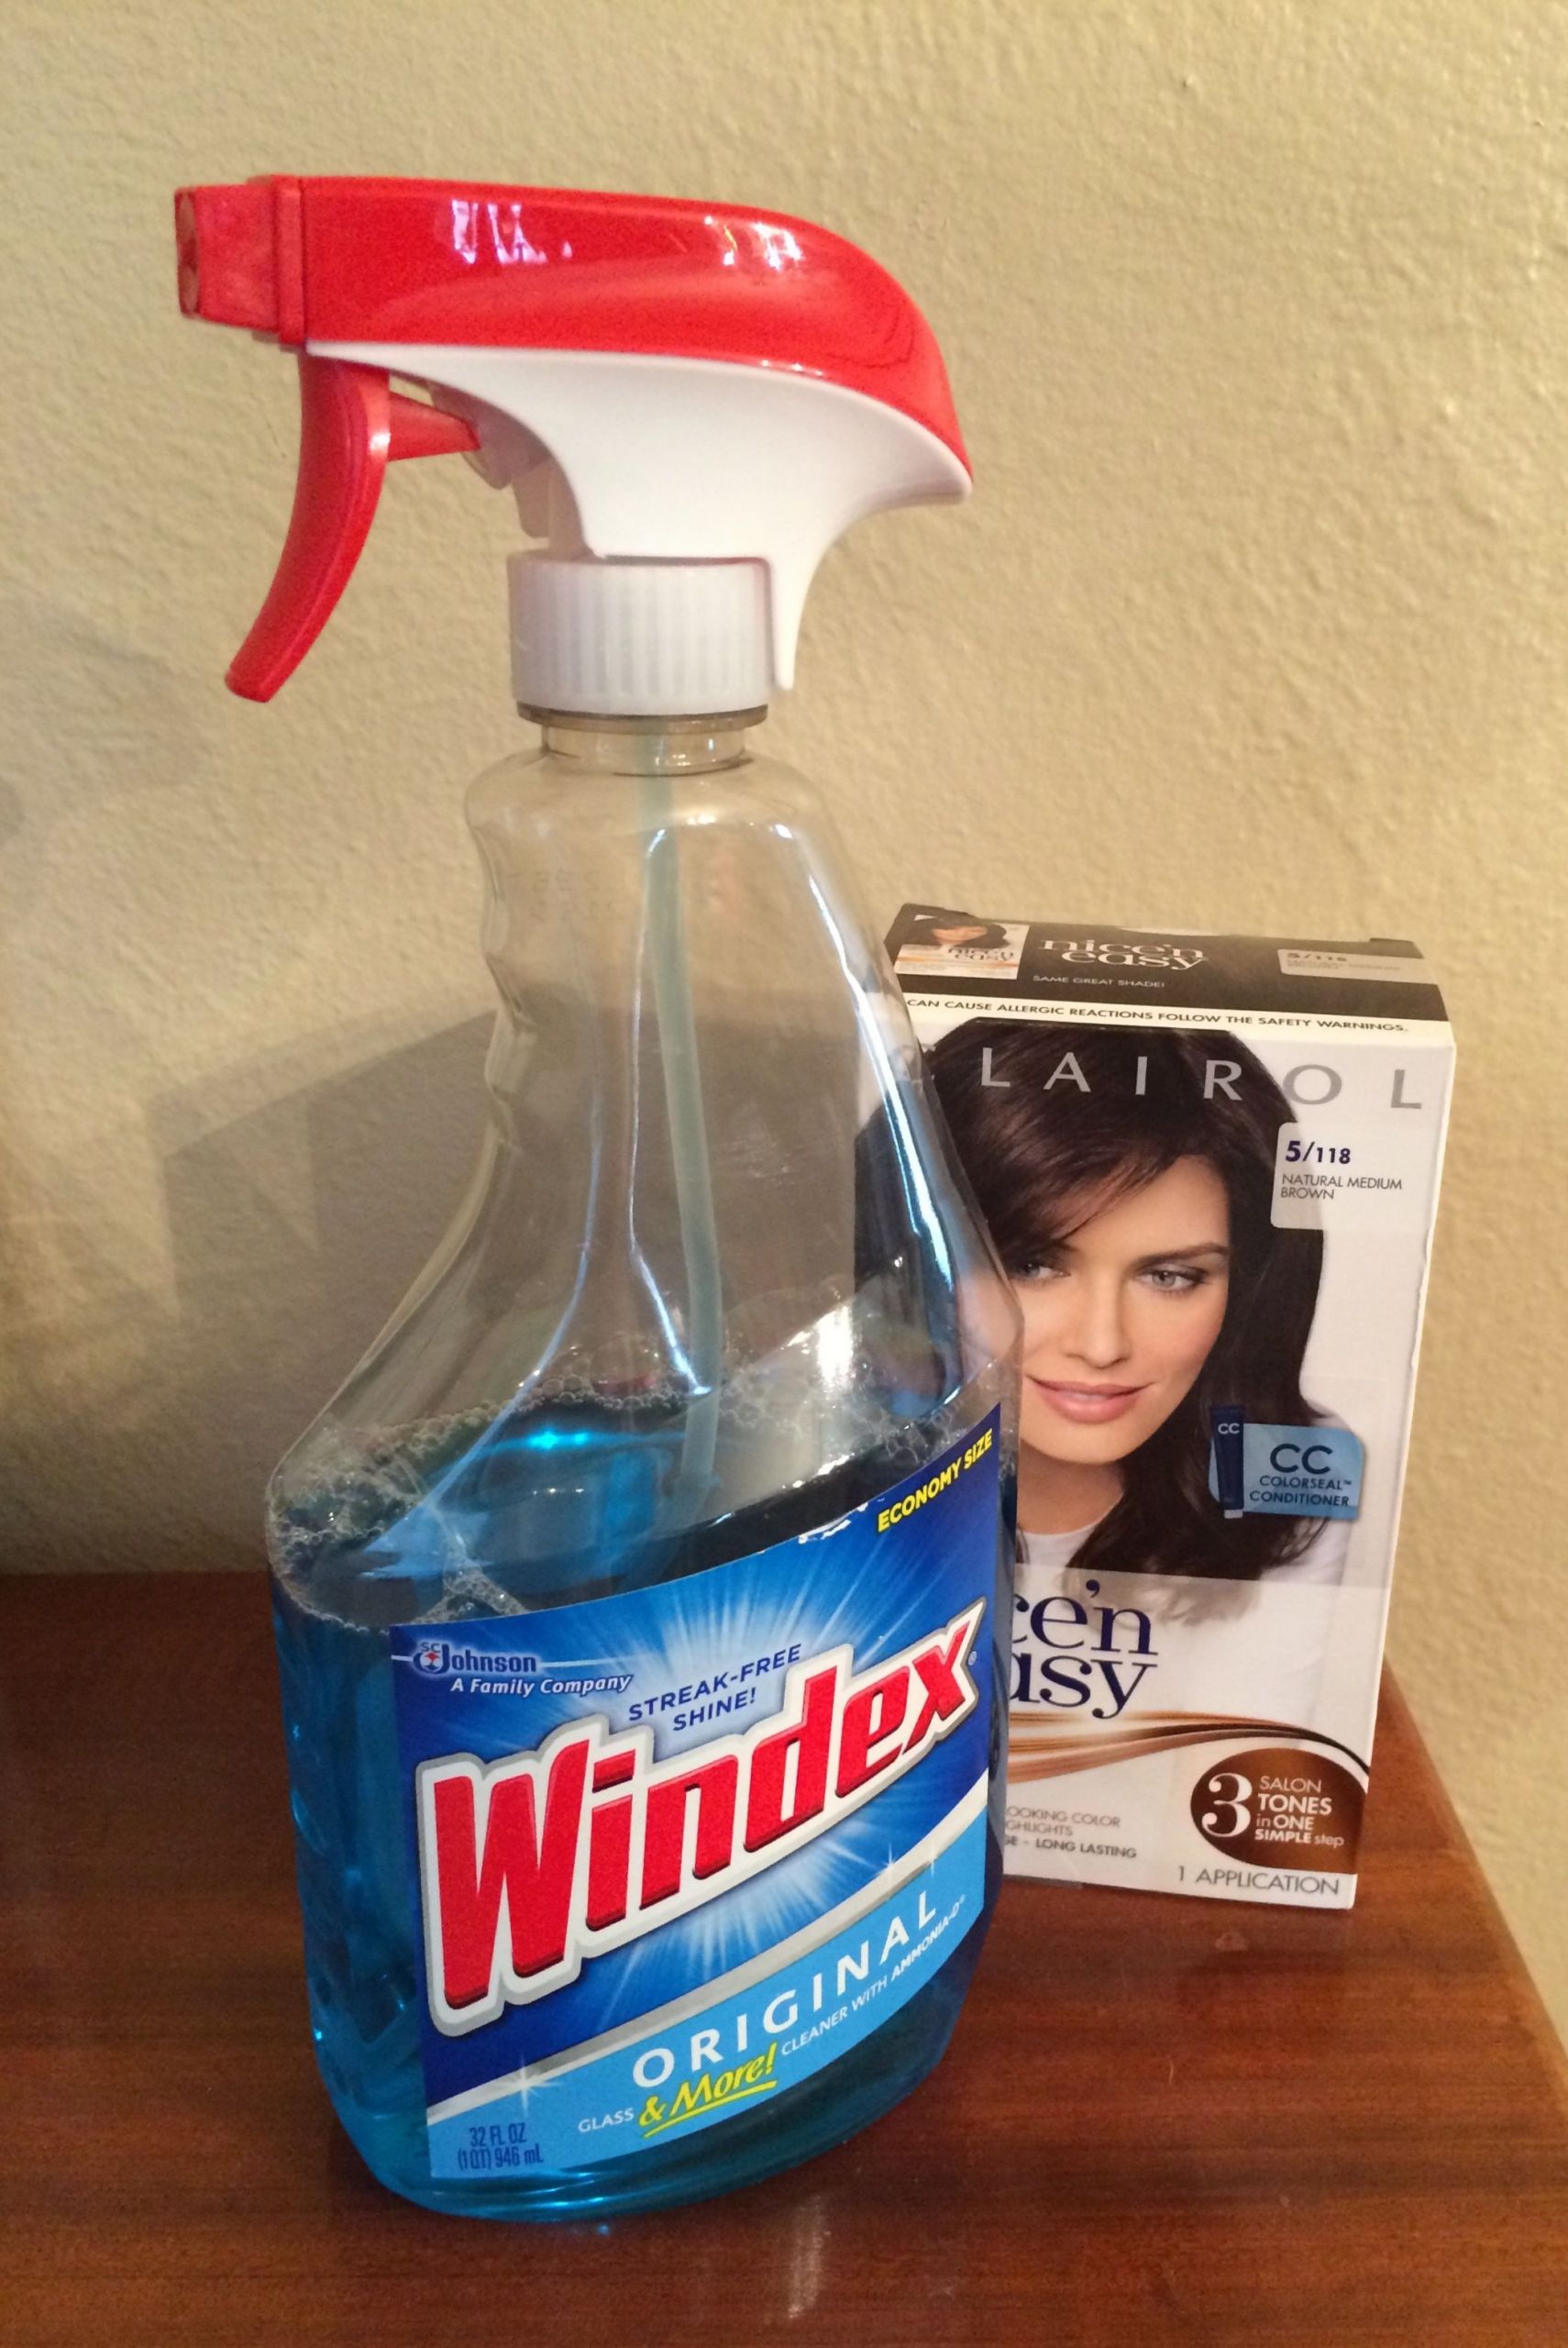 Hair Dye Remover DIY
 My hair stylist told me you can use Windex on a cotton pad